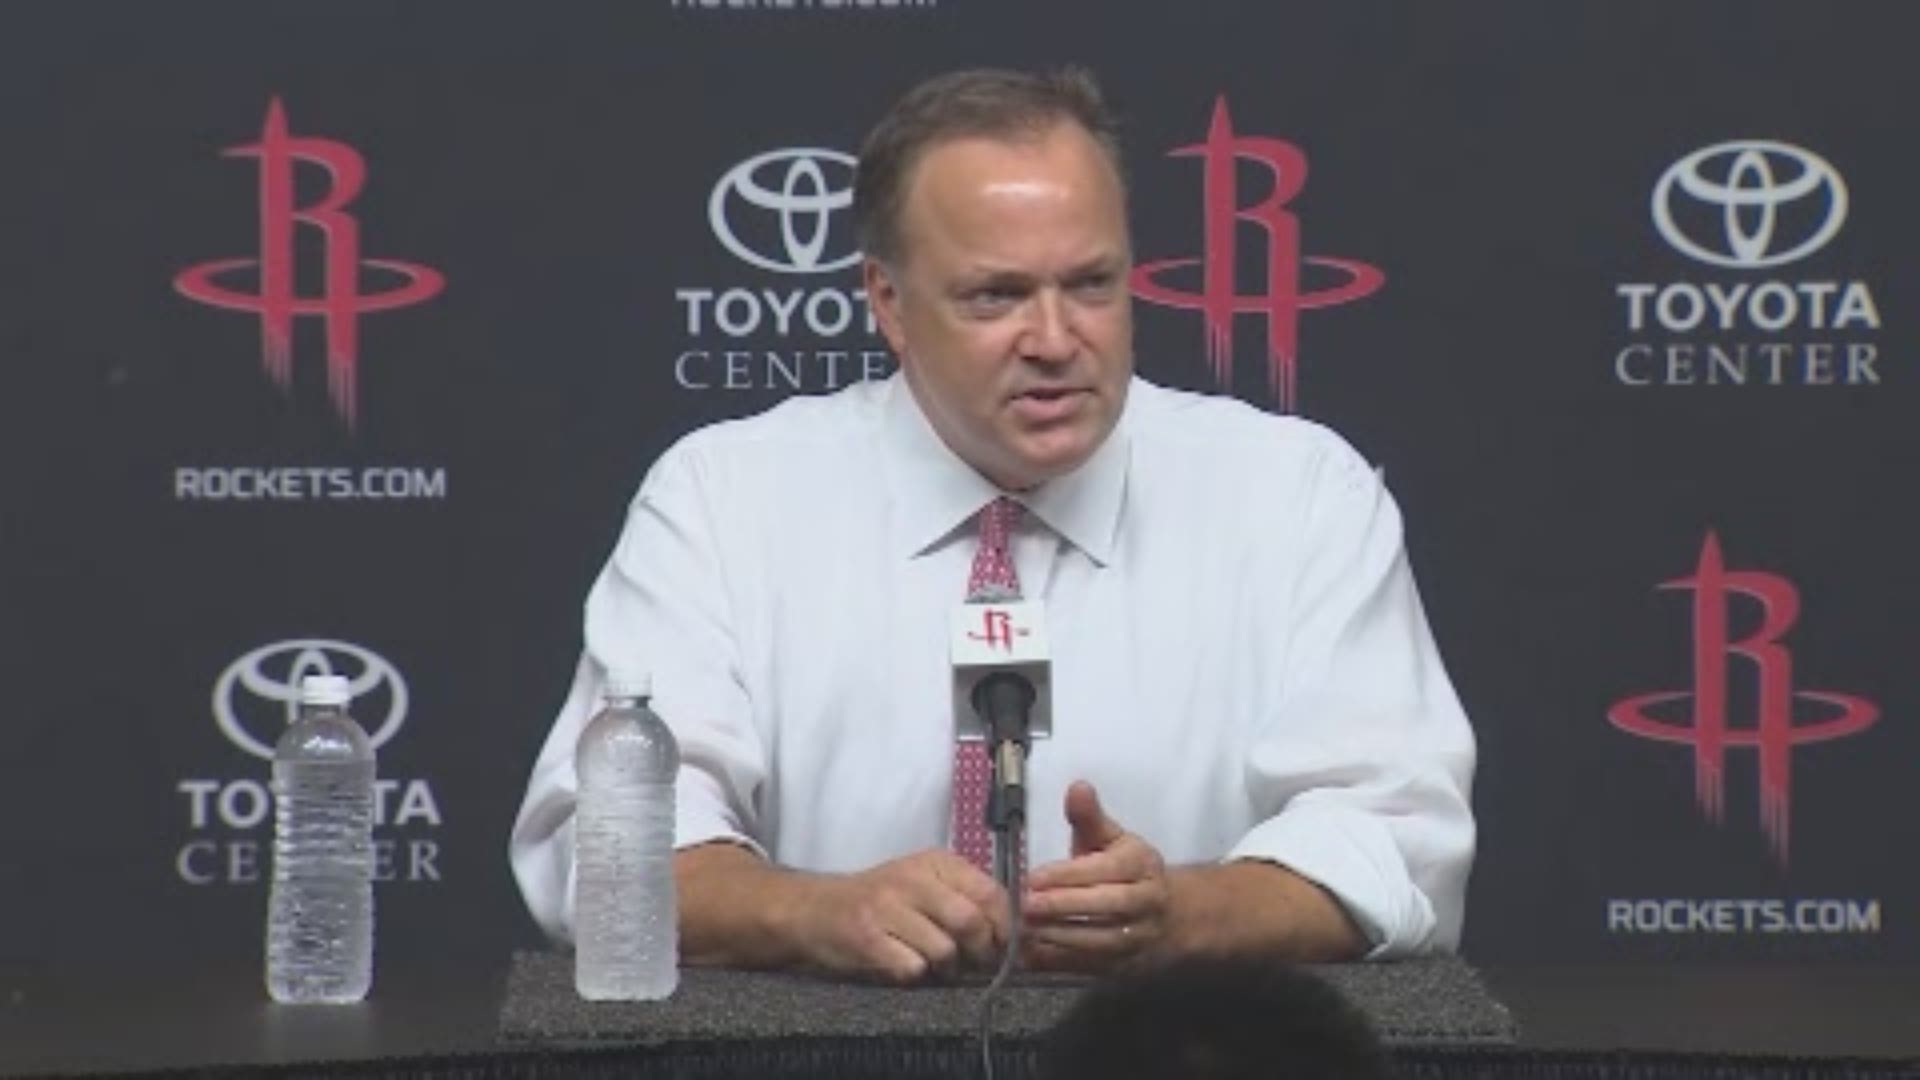 During a press conference Monday, the Houston Rockets announced that Les Alexander is putting the team up for sale.